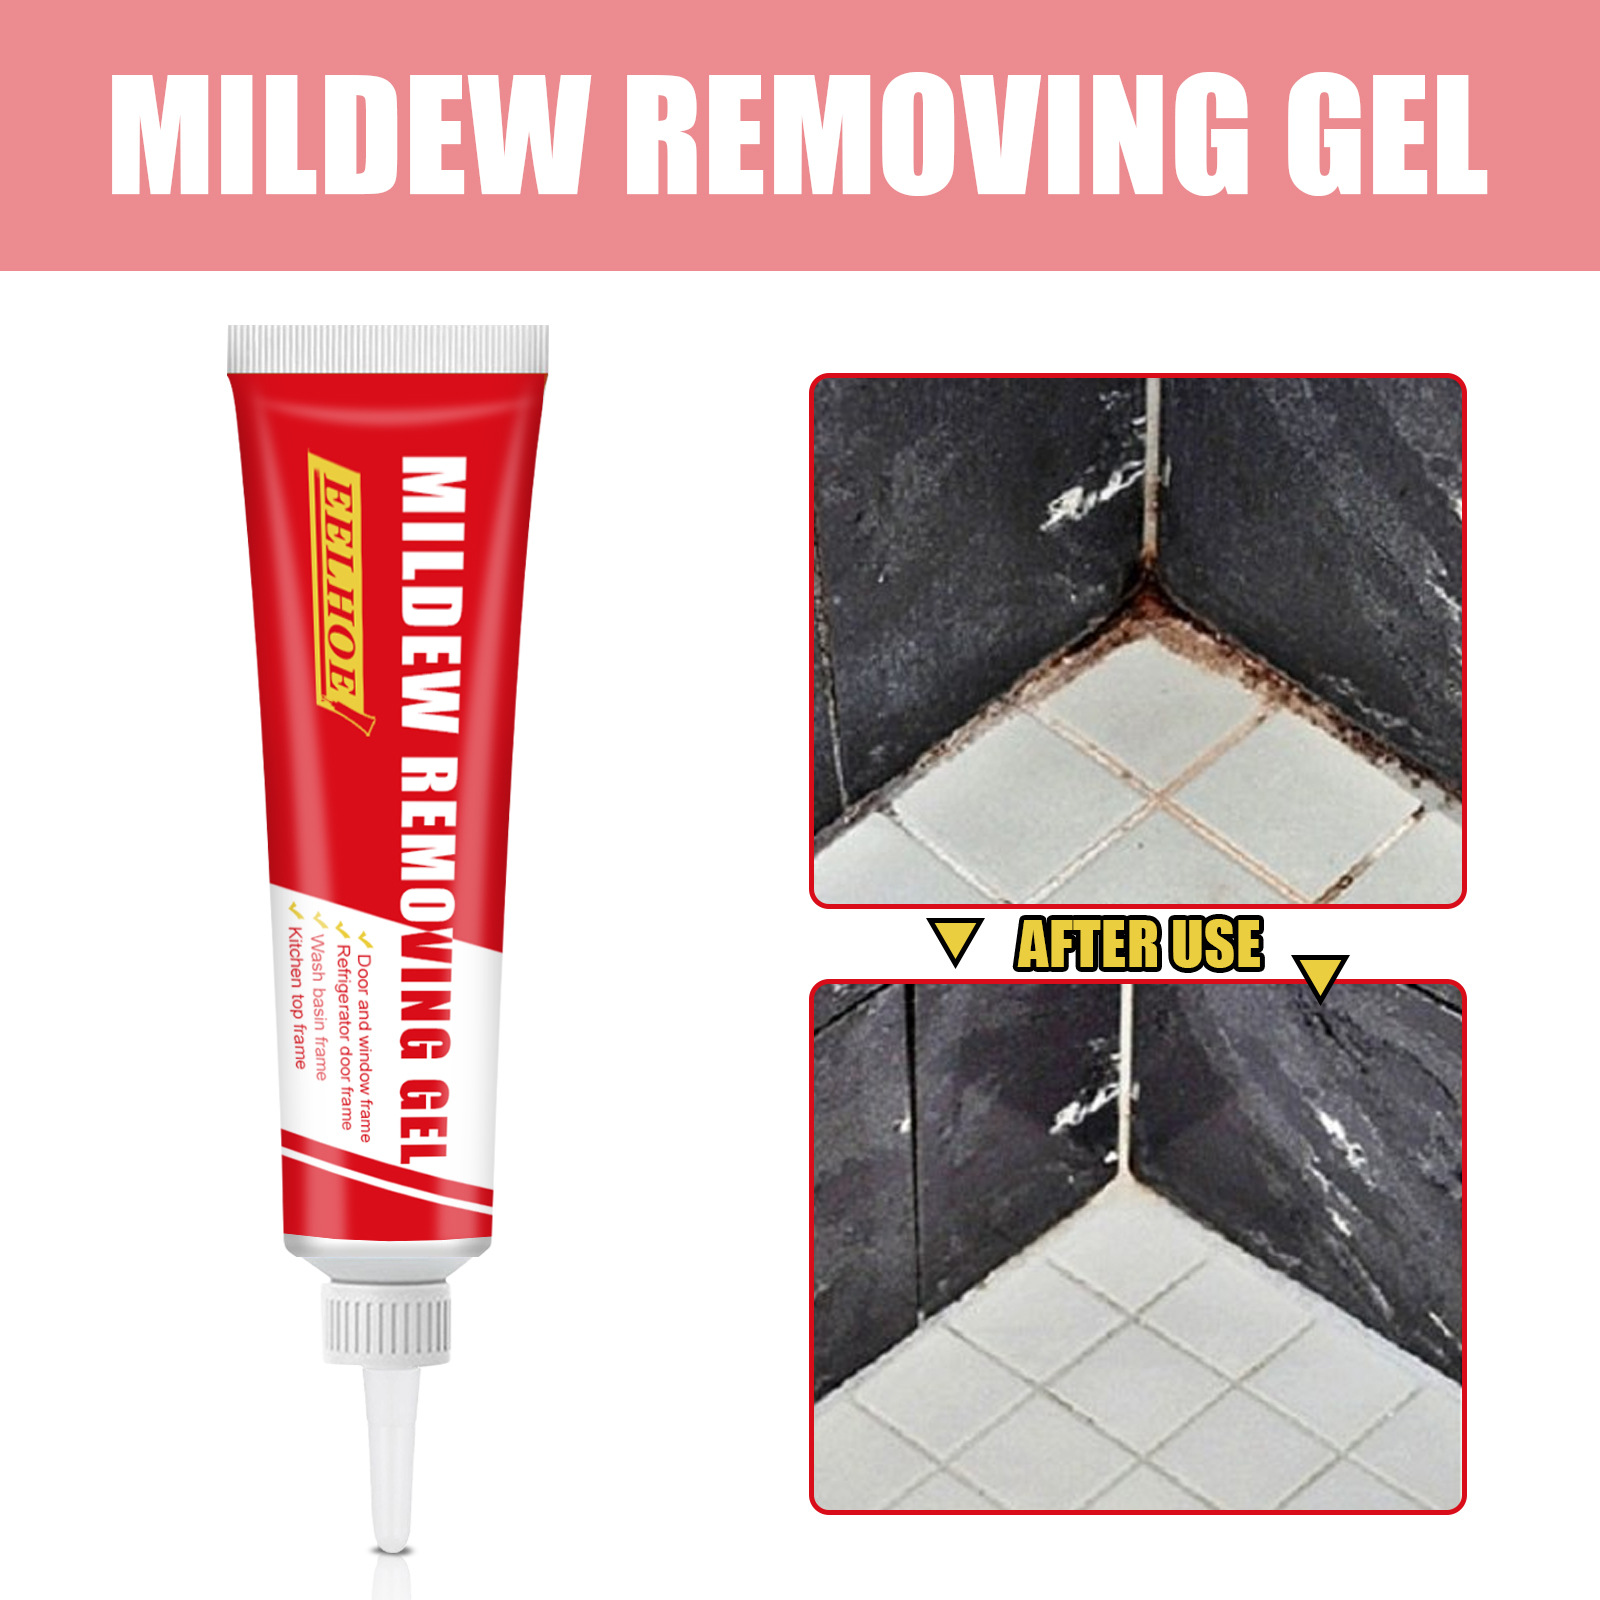 Eelhoe Tile Ant-Mold Agent Bathroom Kitchen Wall Cleaning Stain Removing Mildew Gel Wall Cleaner